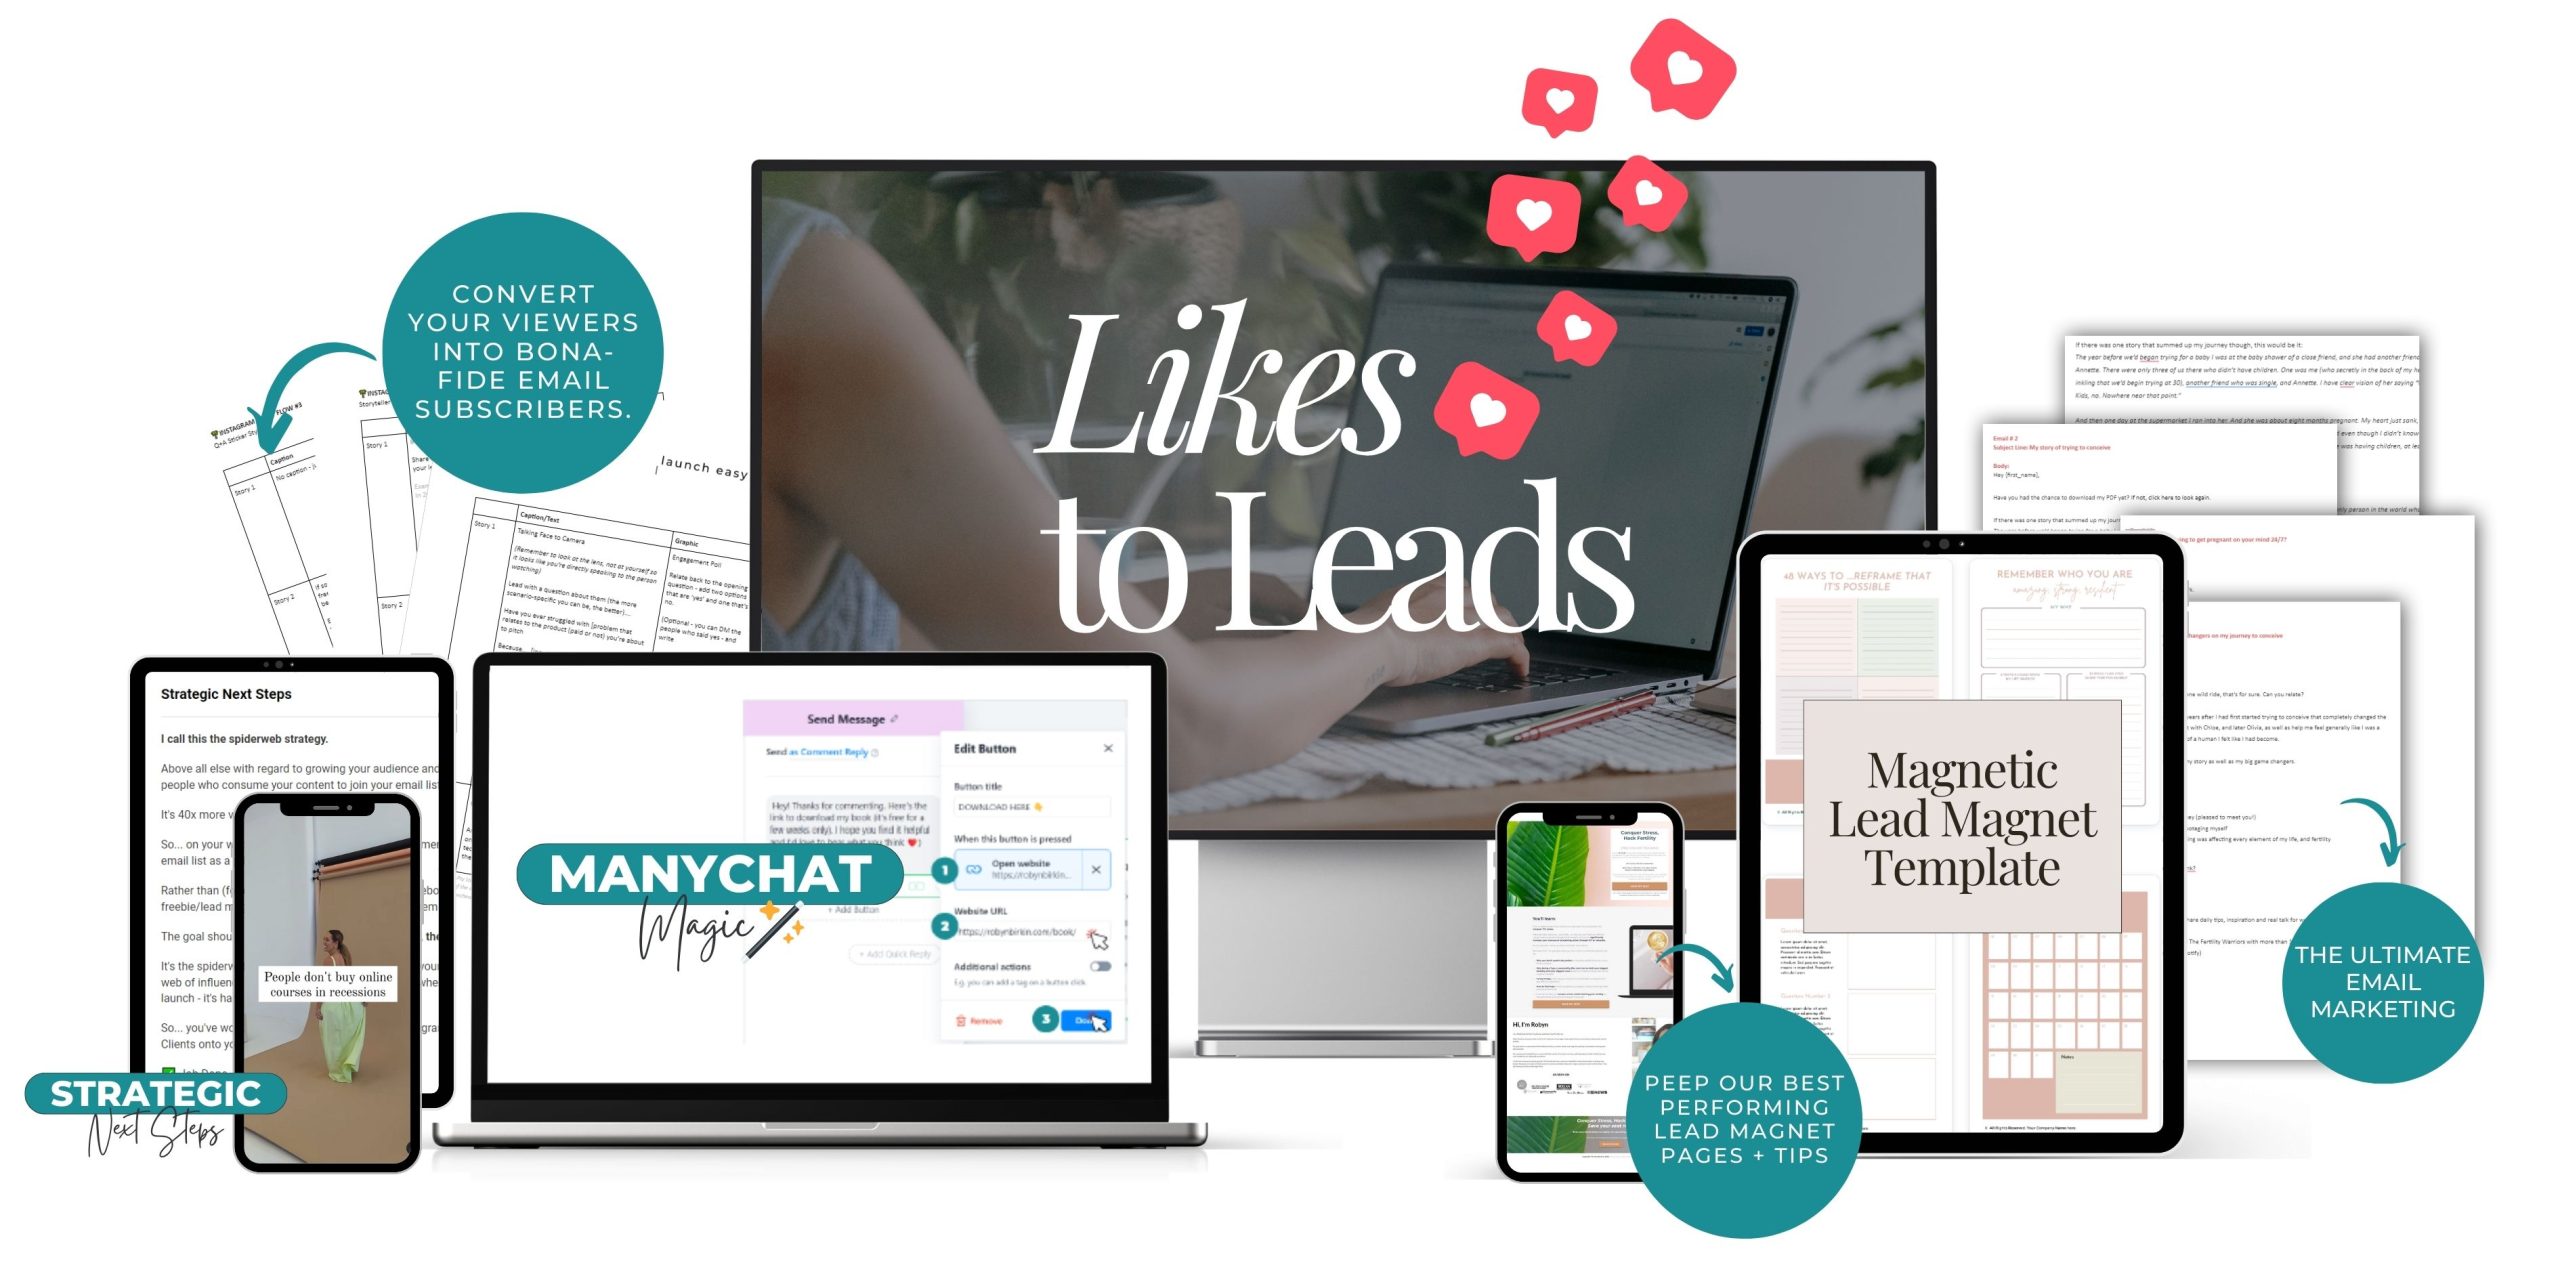 Likes to Lead - Build a 24:7 leads machine that not only boosts your engagement and grows your followers but converts your audience into launch-ready leads